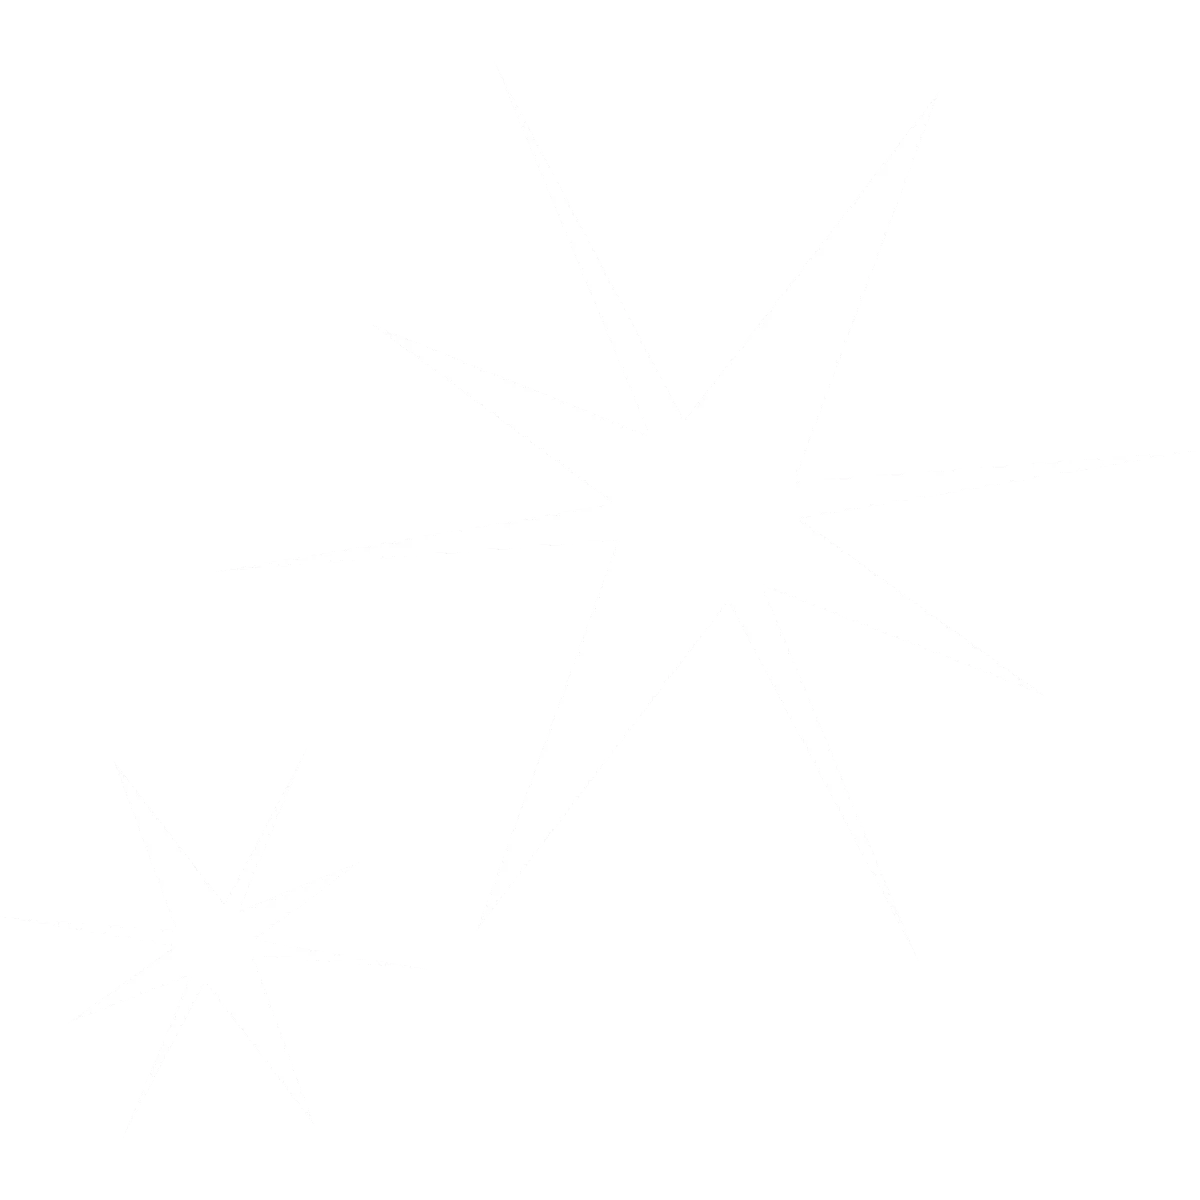 two starburst graphics in white